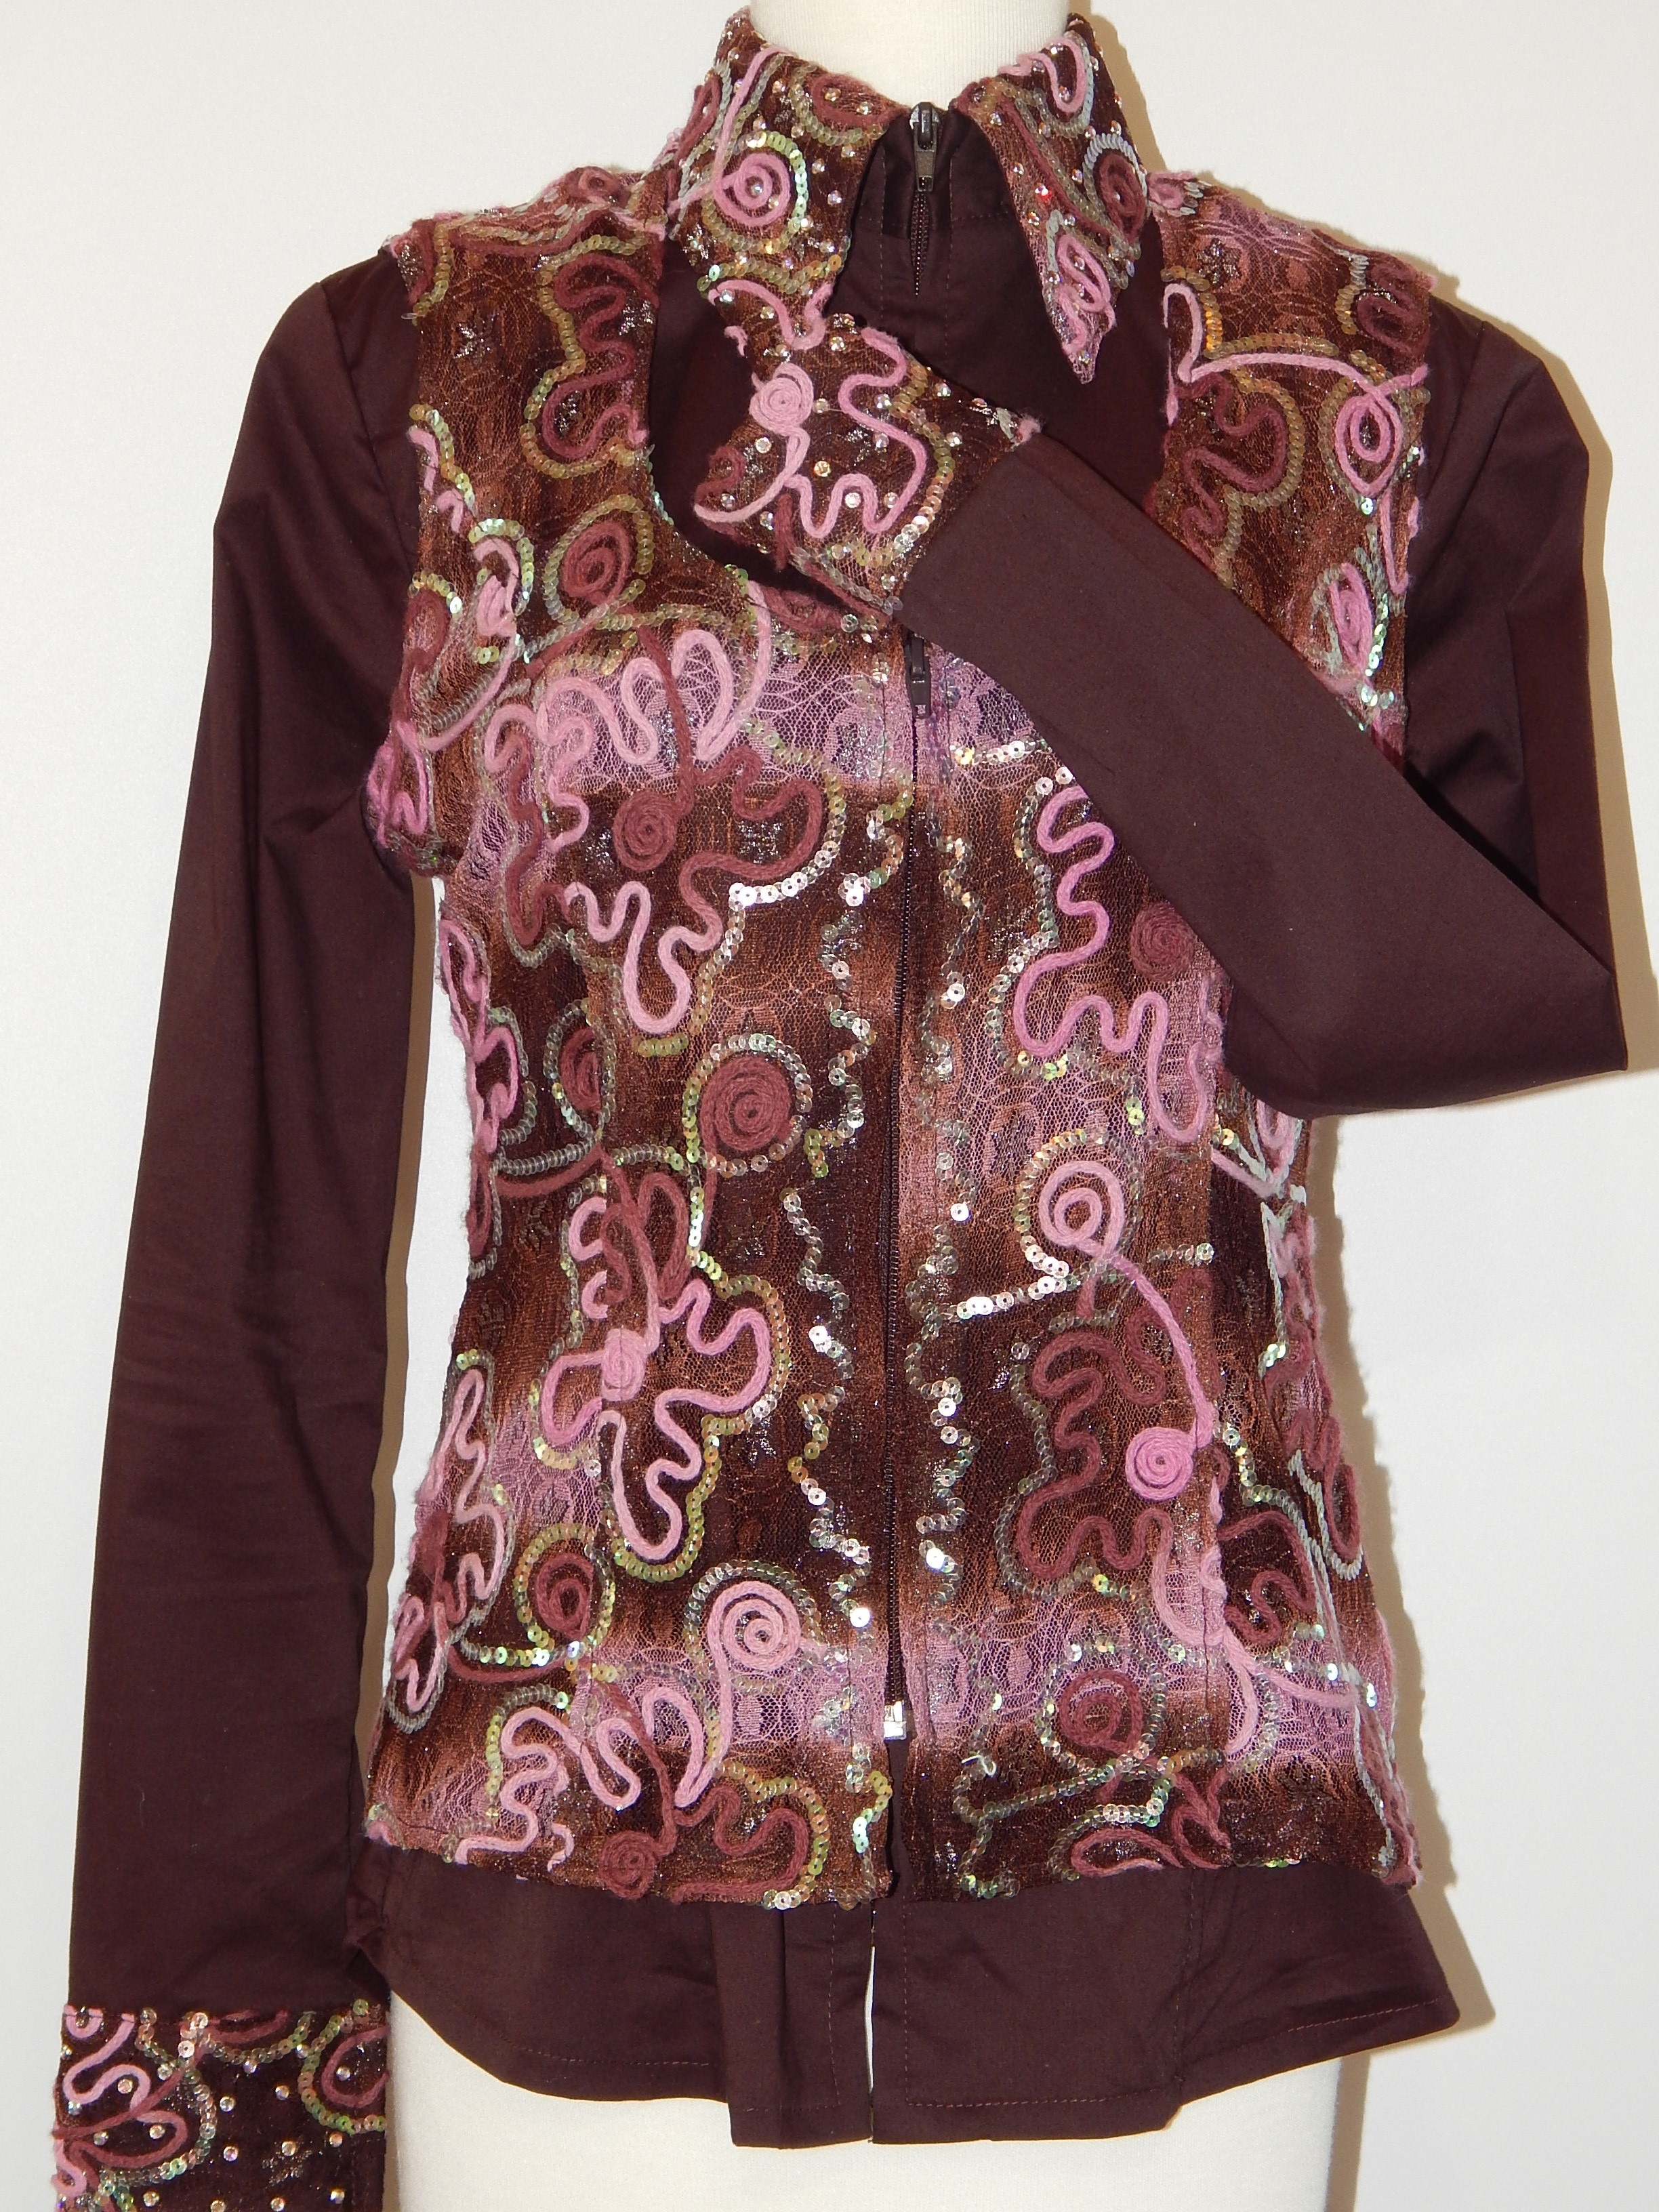 MKC Dark Brown Fitted Show Shirt with Jewels and Applique on Collar and Cuffs